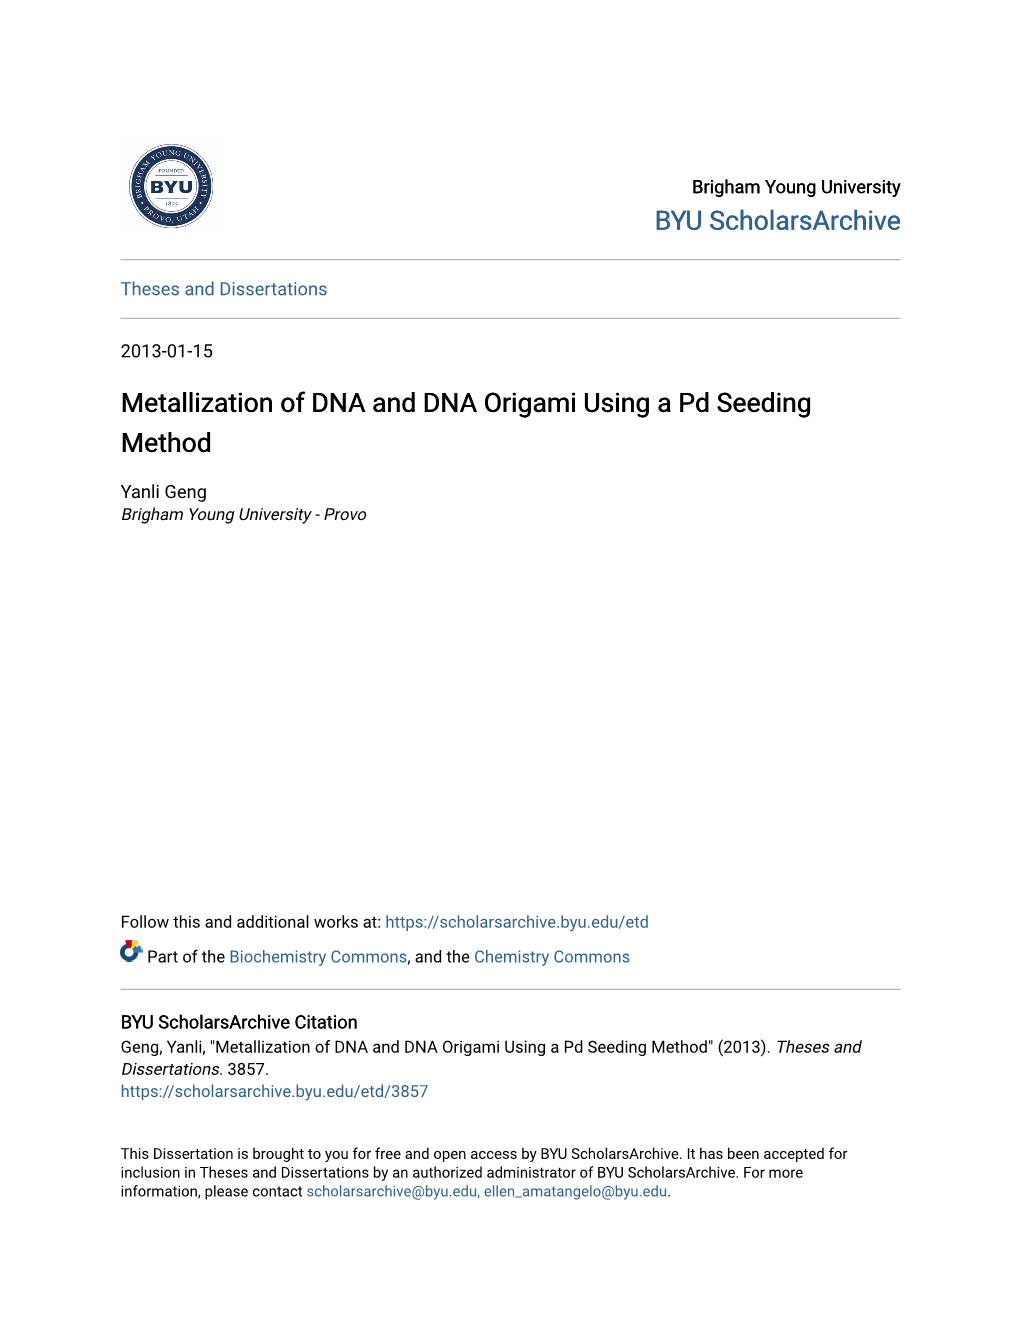 Metallization of DNA and DNA Origami Using a Pd Seeding Method